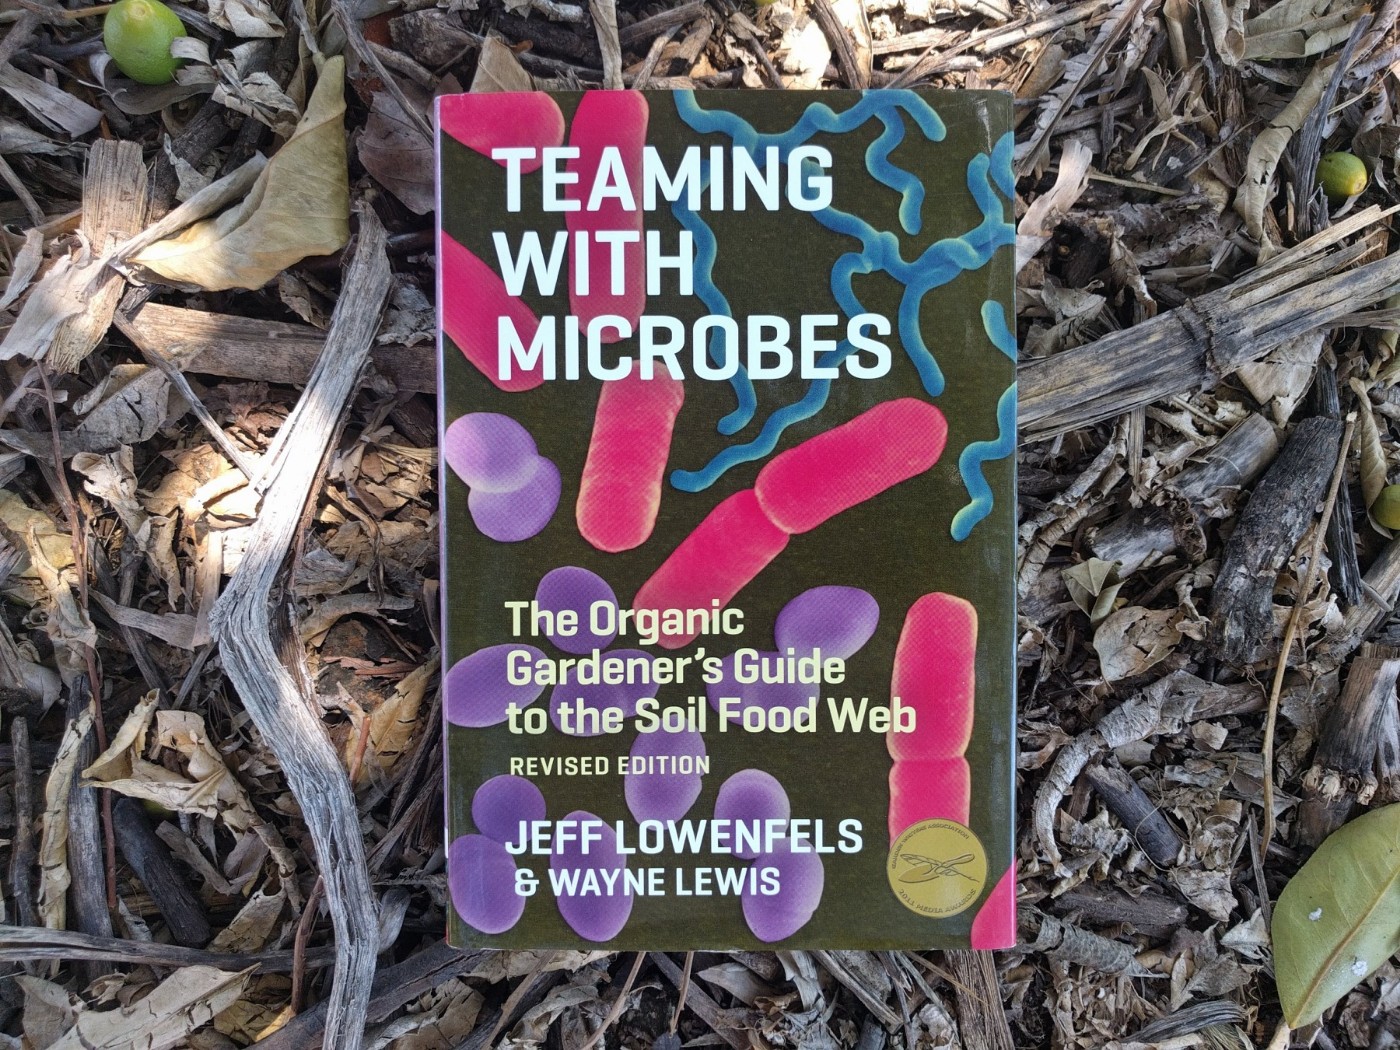 Teaming with Microbes: The Organic Gardeners Guide to the